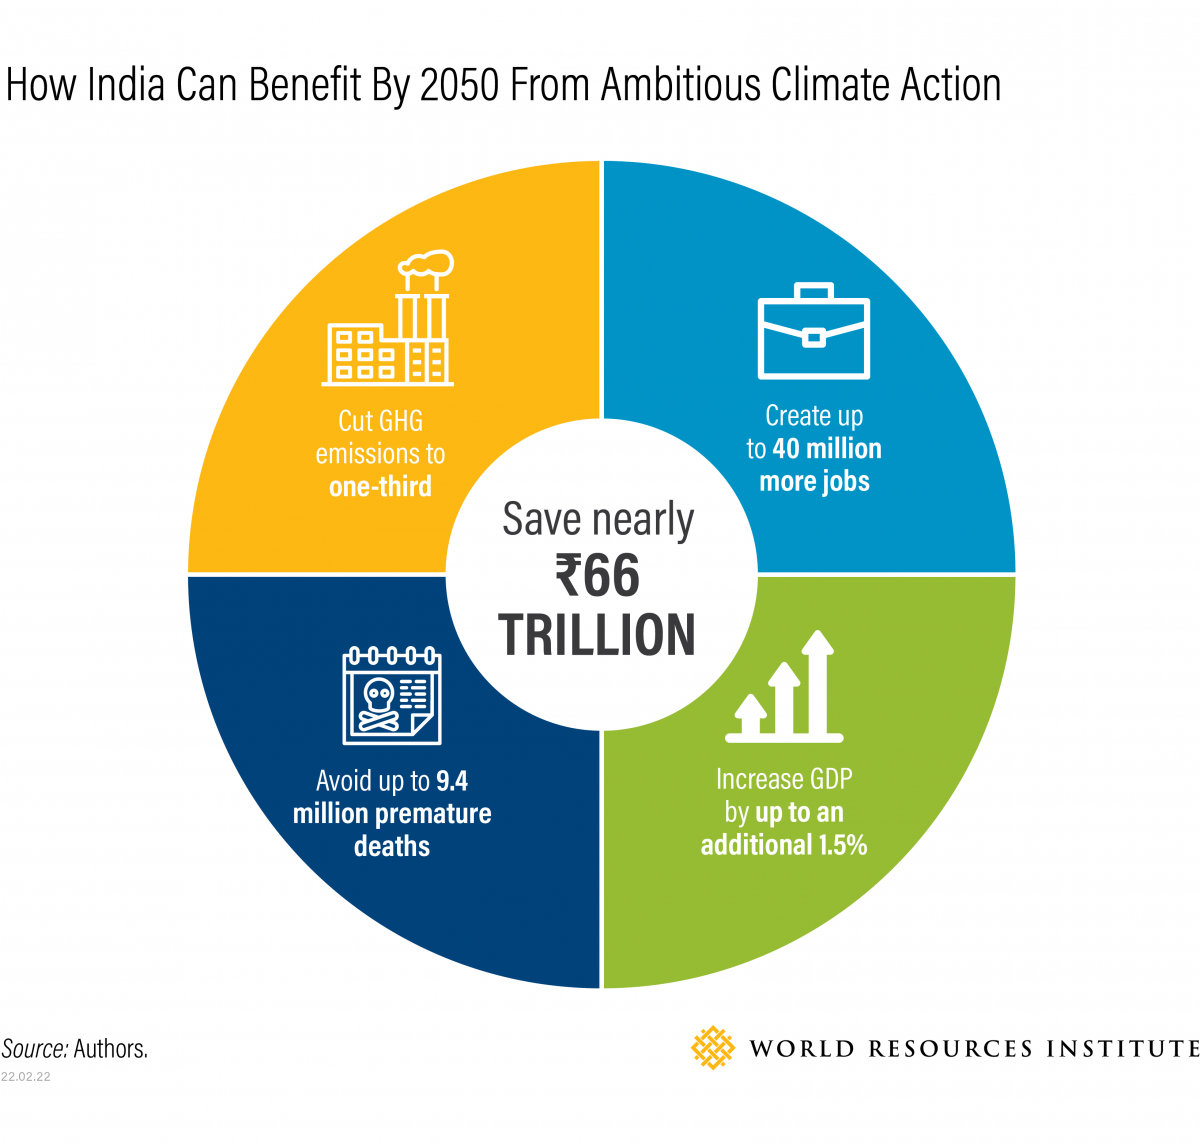 How India Can Benefit By 2050 From Ambitious Climate Action